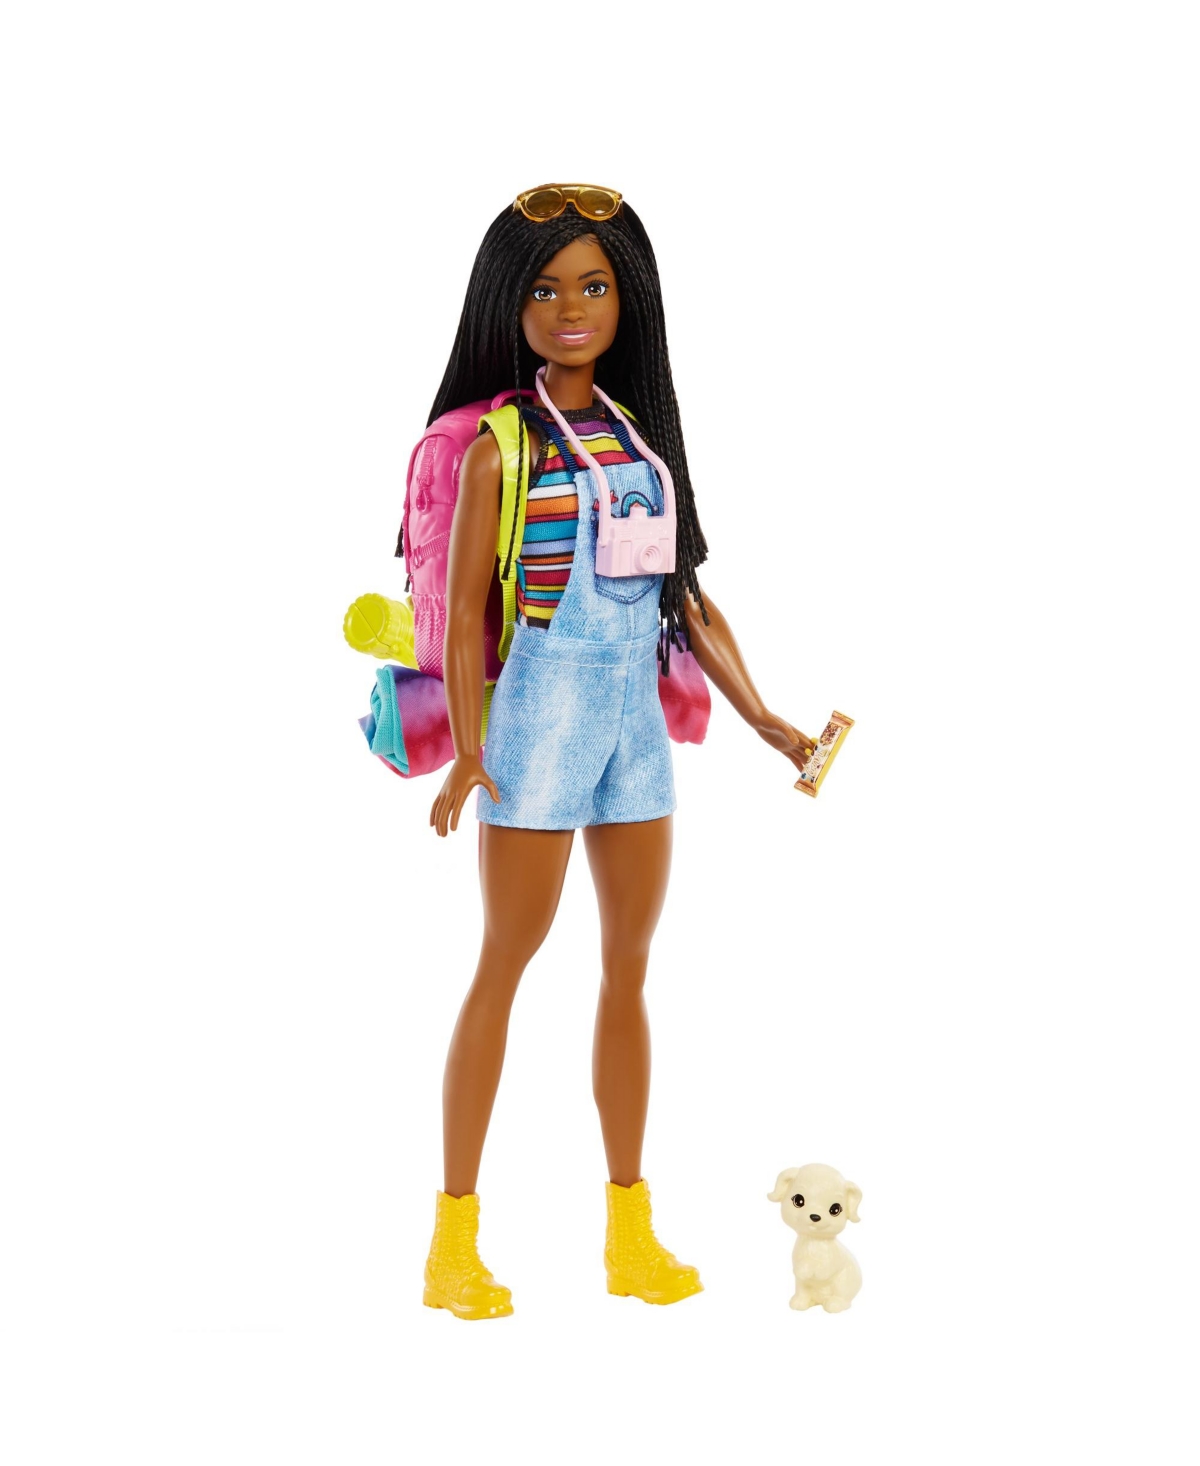 Barbie Kids' Doll And Accessories, It Takes Two "brooklyn" Camping Doll And 10+ Pieces In Multi